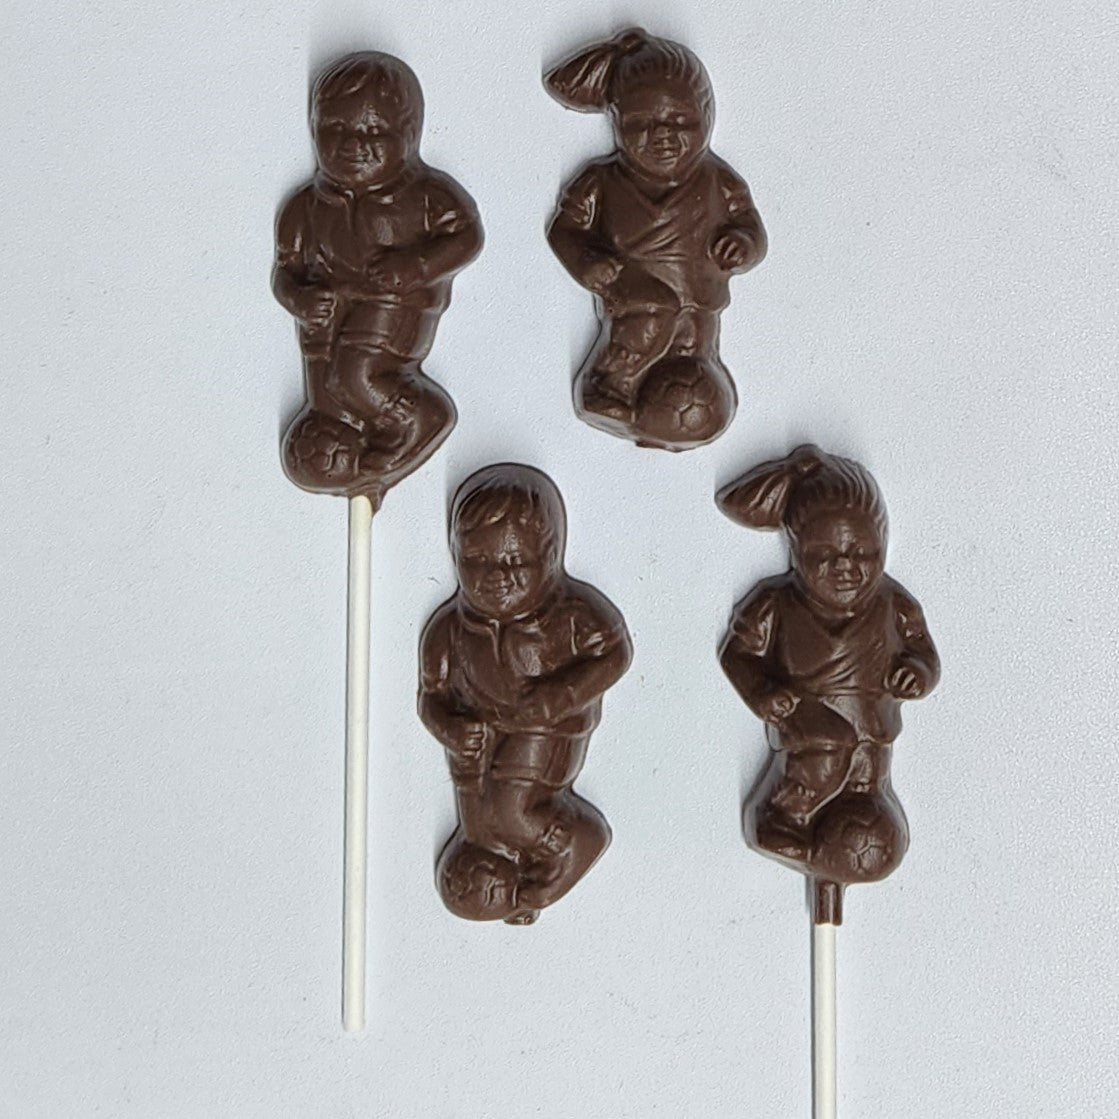 Solid milk chocolate soccer kids, available as favors or lollipops